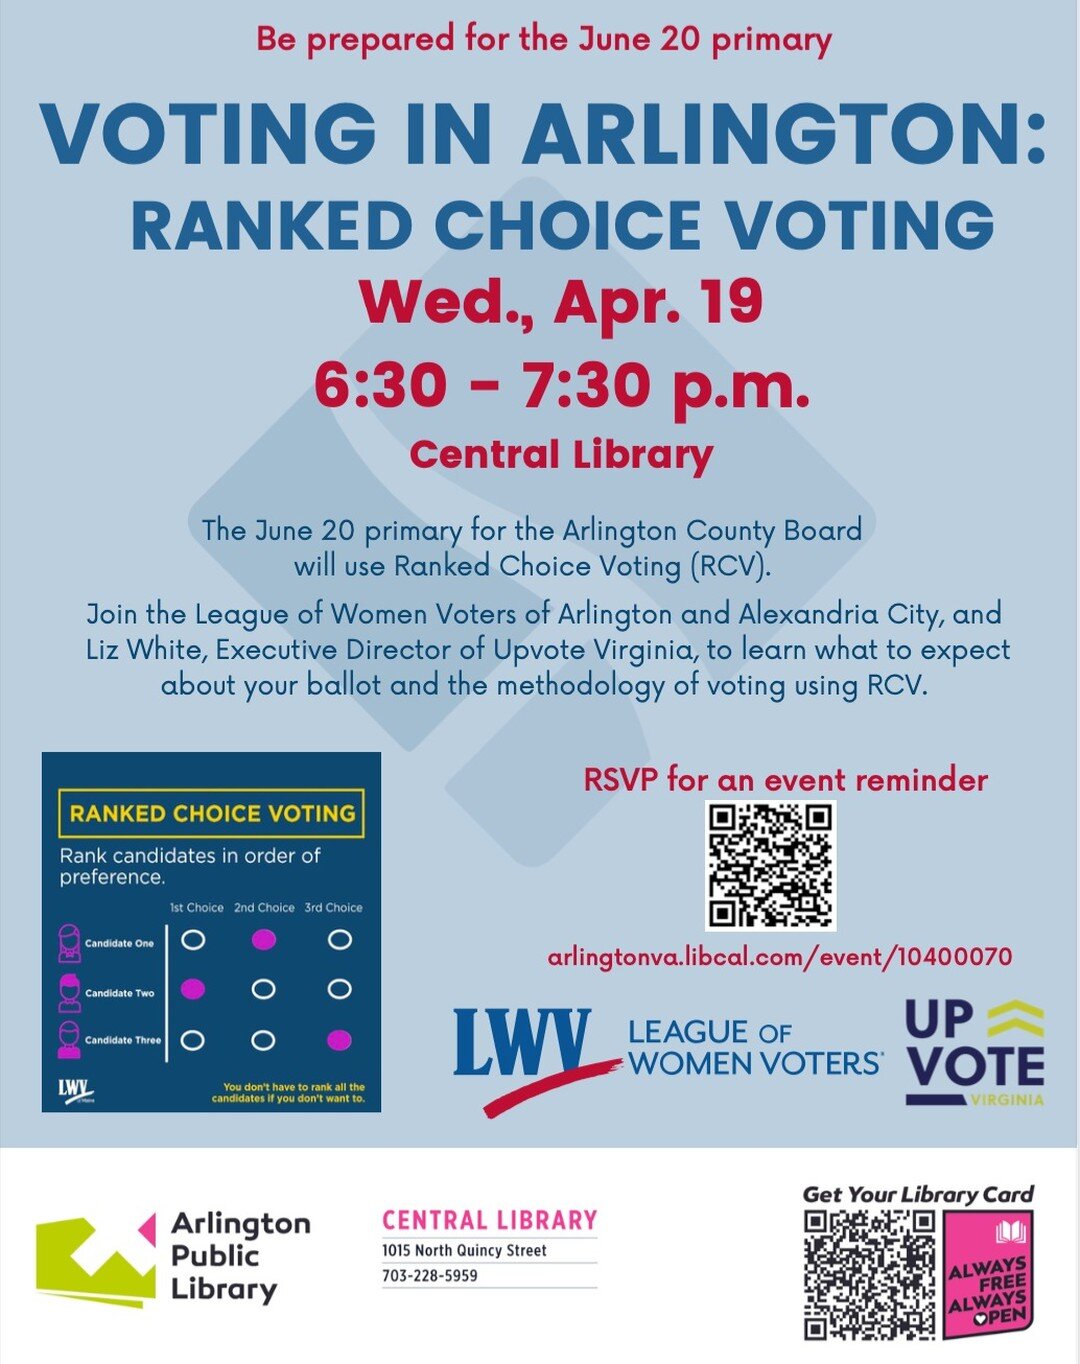 Join us tomorrow in Arlington to learn about using #rankedchoicevoting in the June 20 Dem primary. Thanks to @apl.reachingout, @lwvarlalexcity, and @arlingtonvotes for getting the word out to voters so they can get ready to rank!